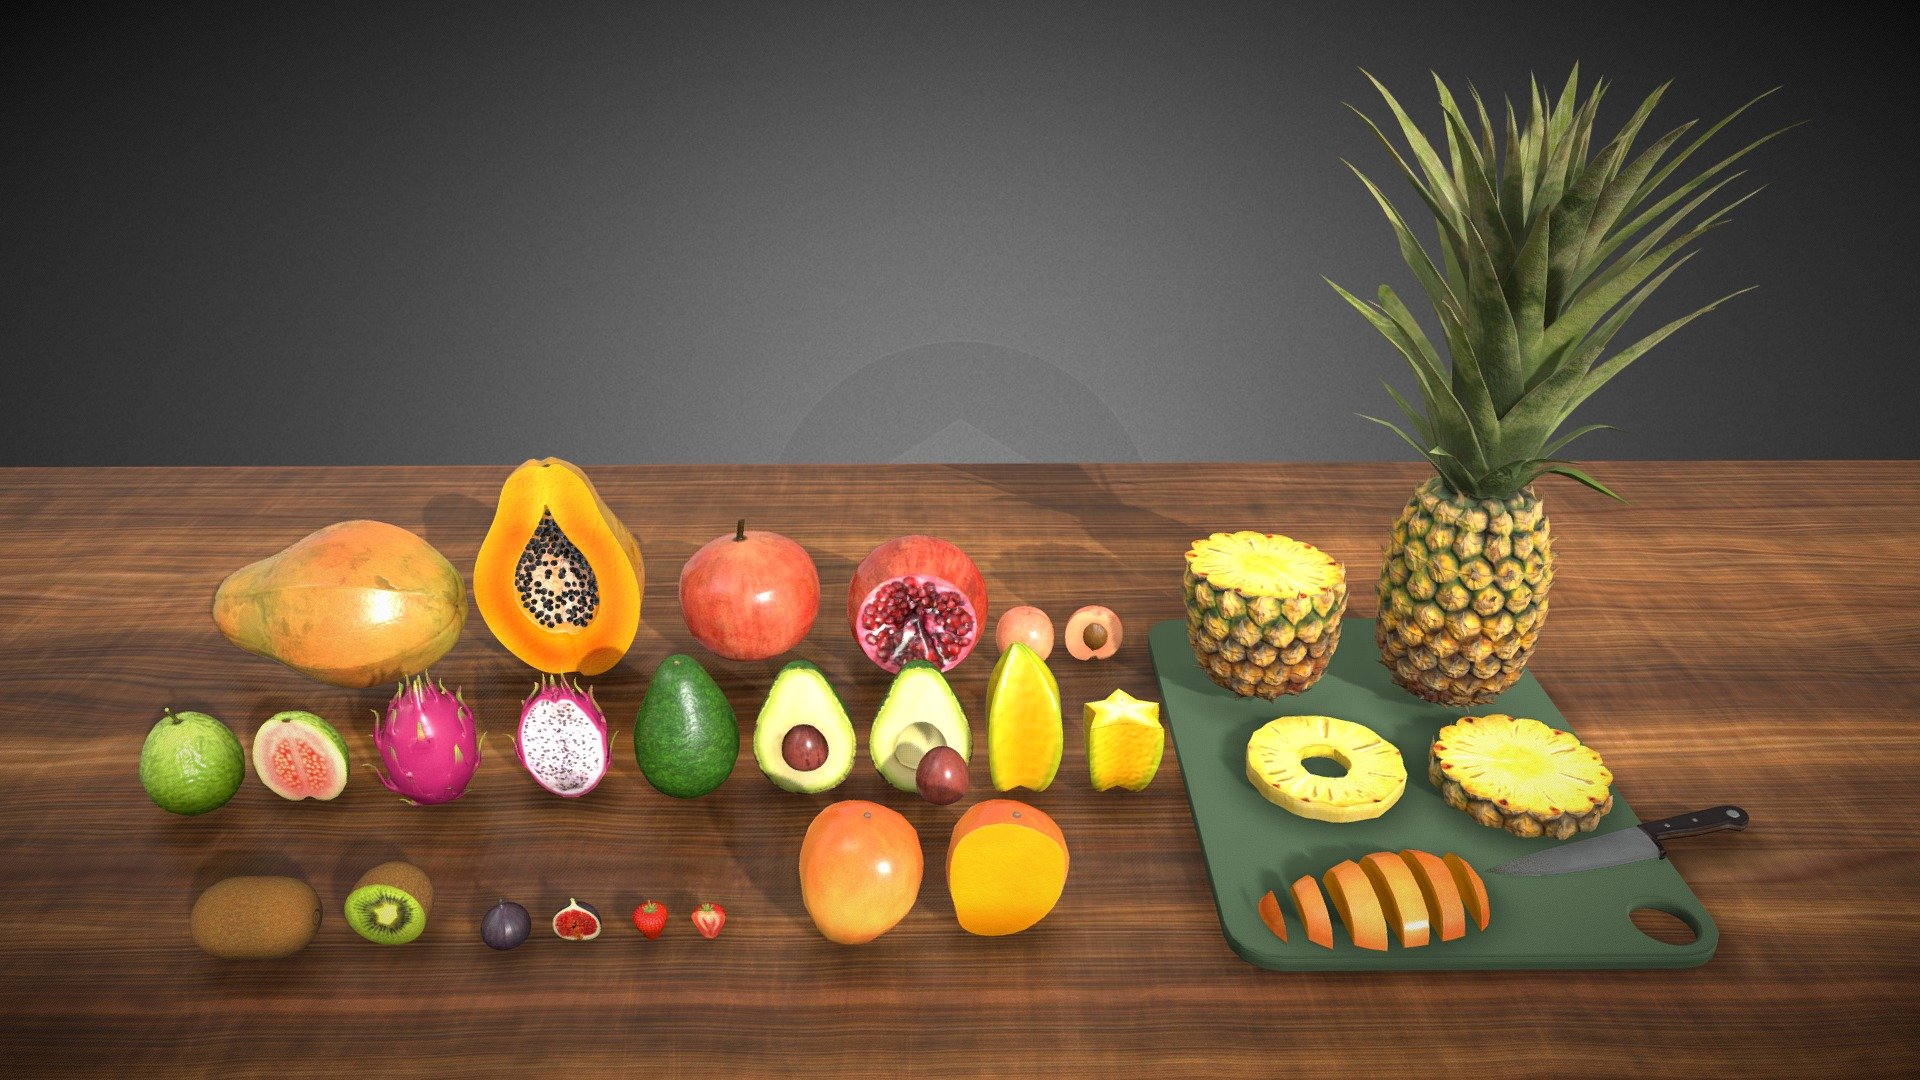 Fruits Pack contains low poly 3D models of fastfoods with High Quality textures to fill up your game environment. There are in all 10+ unique fruits with PBR textures in this package. The assets are VR-Ready and game ready . 

For Unity3d (Built-in, URP, HDRP) Ready Assets visit our Unity Asset Store Page

Enjoy and please rate the asset!

Contact us on for AR/VR related queries and development support

Gmail - designer@devdensolutions.com

Website

Twitter

Instagram

Facebook

Linkedin

Youtube - Fruits Pack - Buy Royalty Free 3D model by Devden 3d model